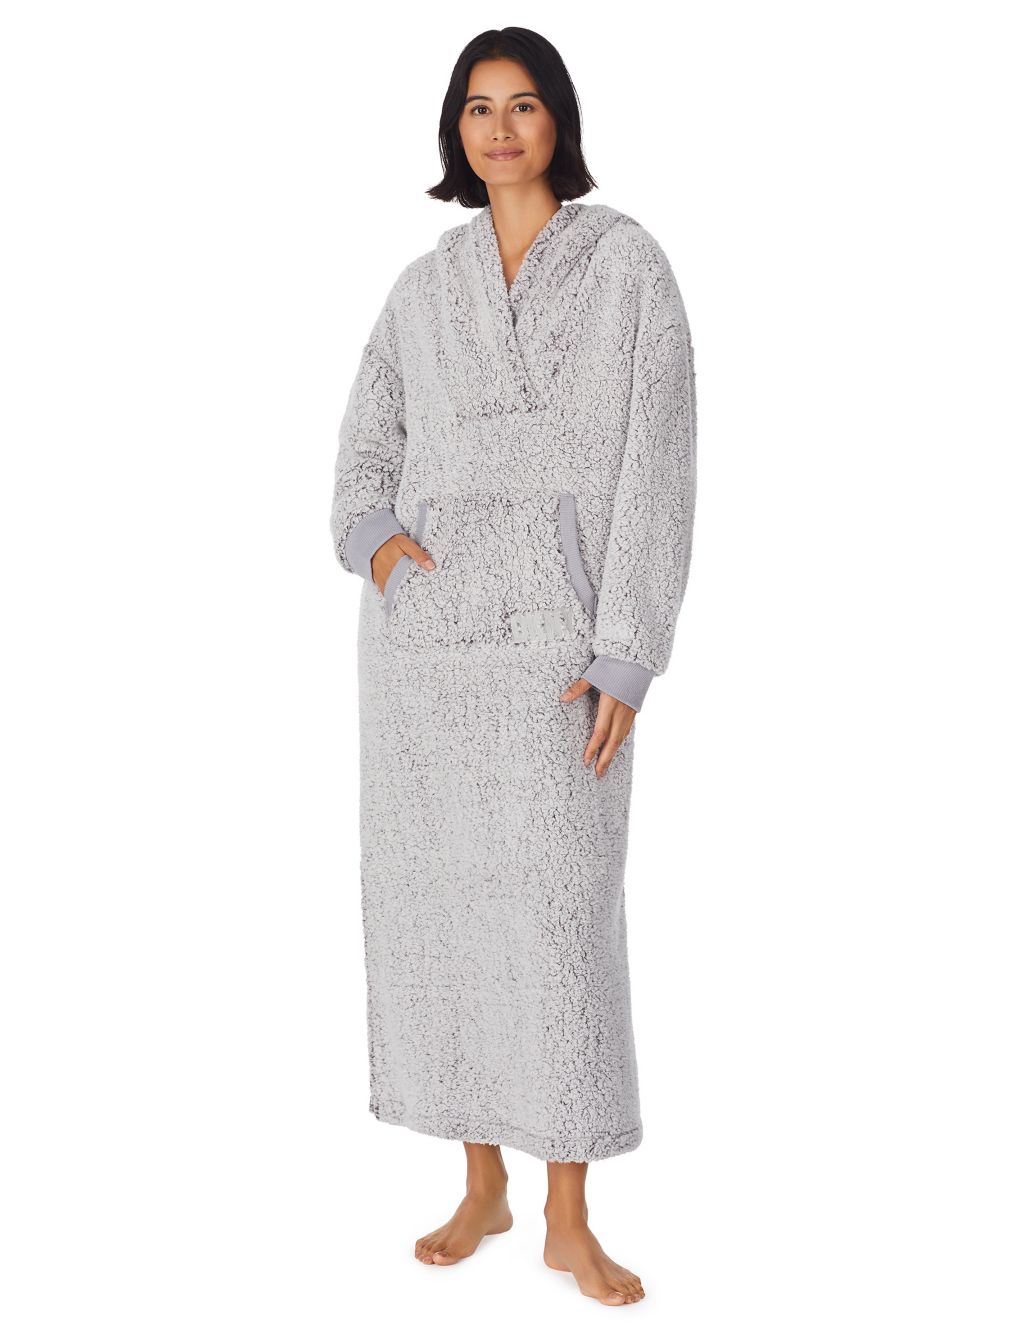 Hooded Long Dressing Gown image 1